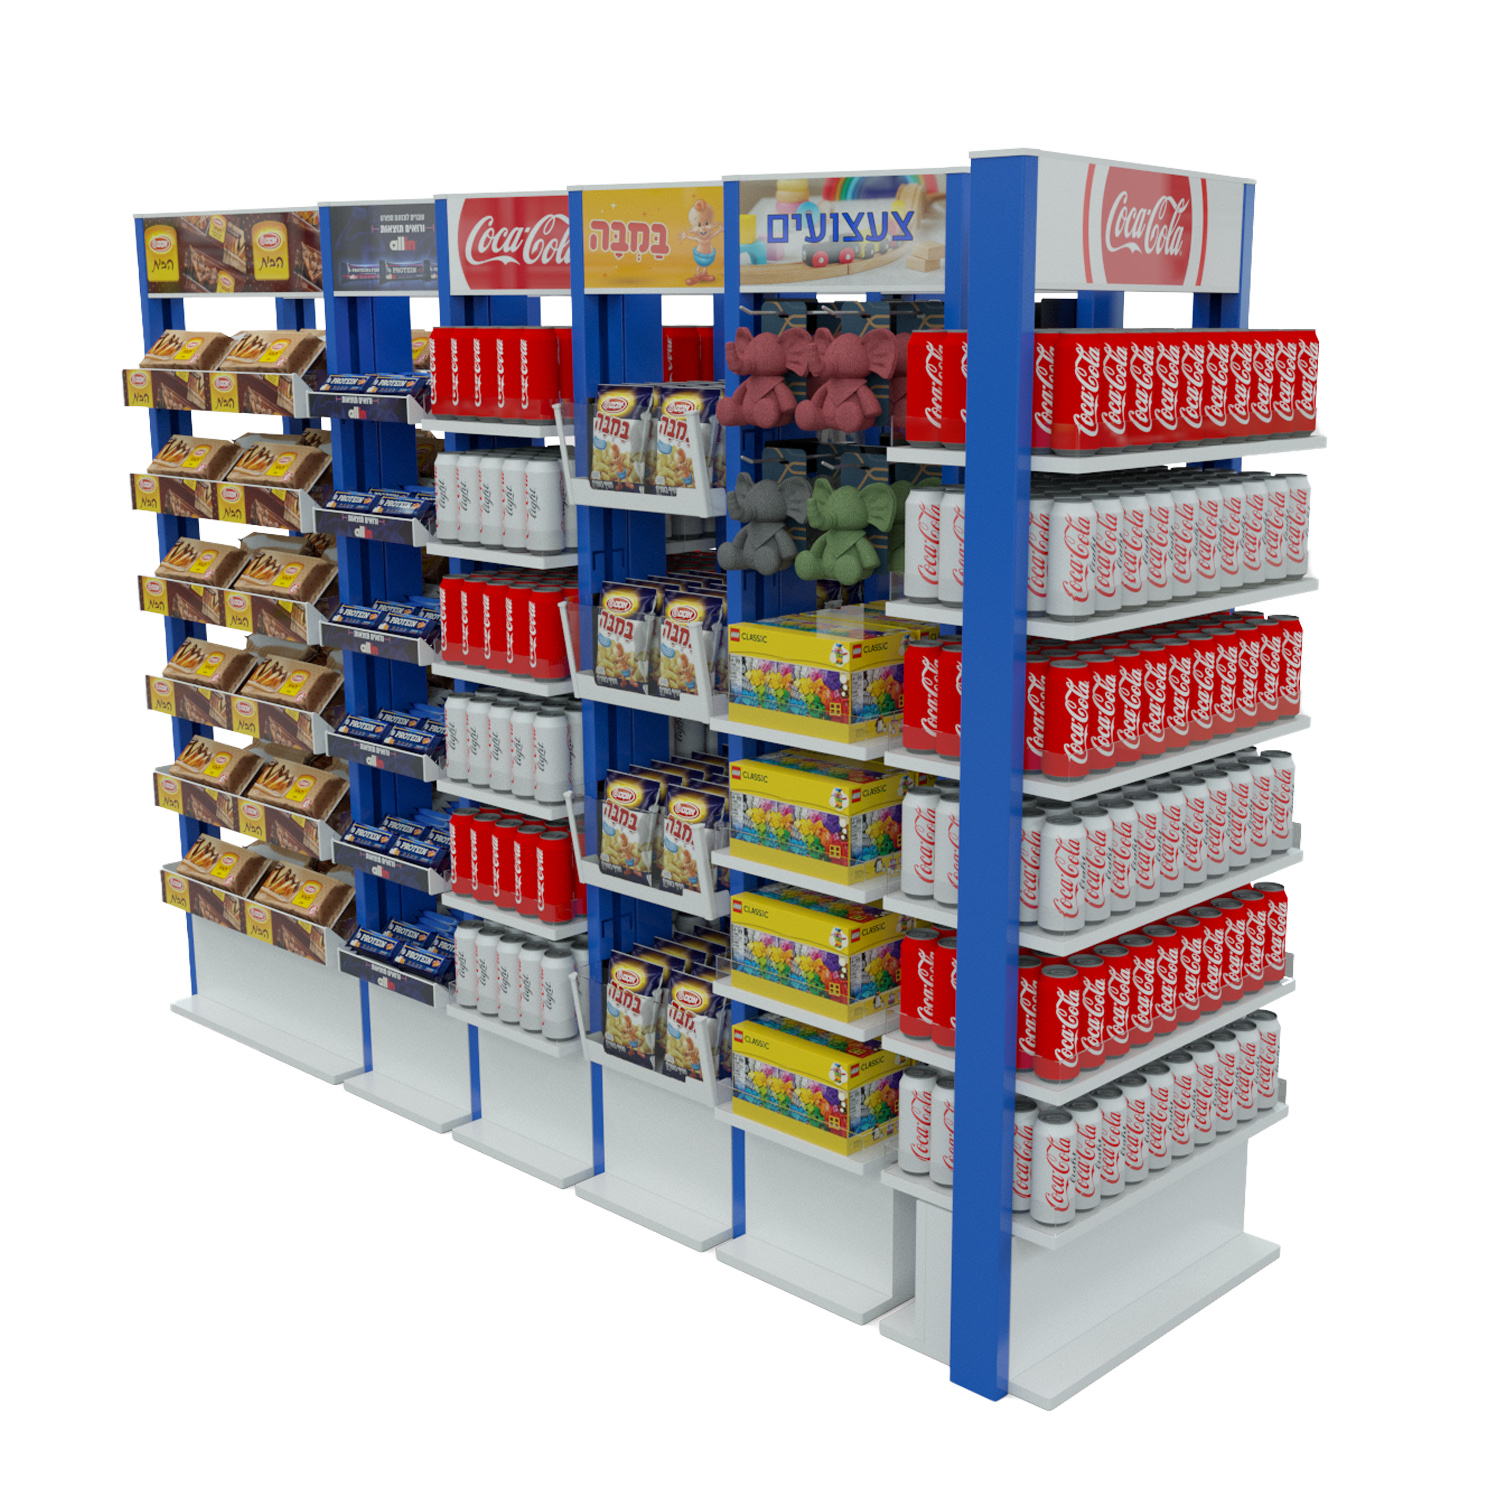 GROCERY - Shelving